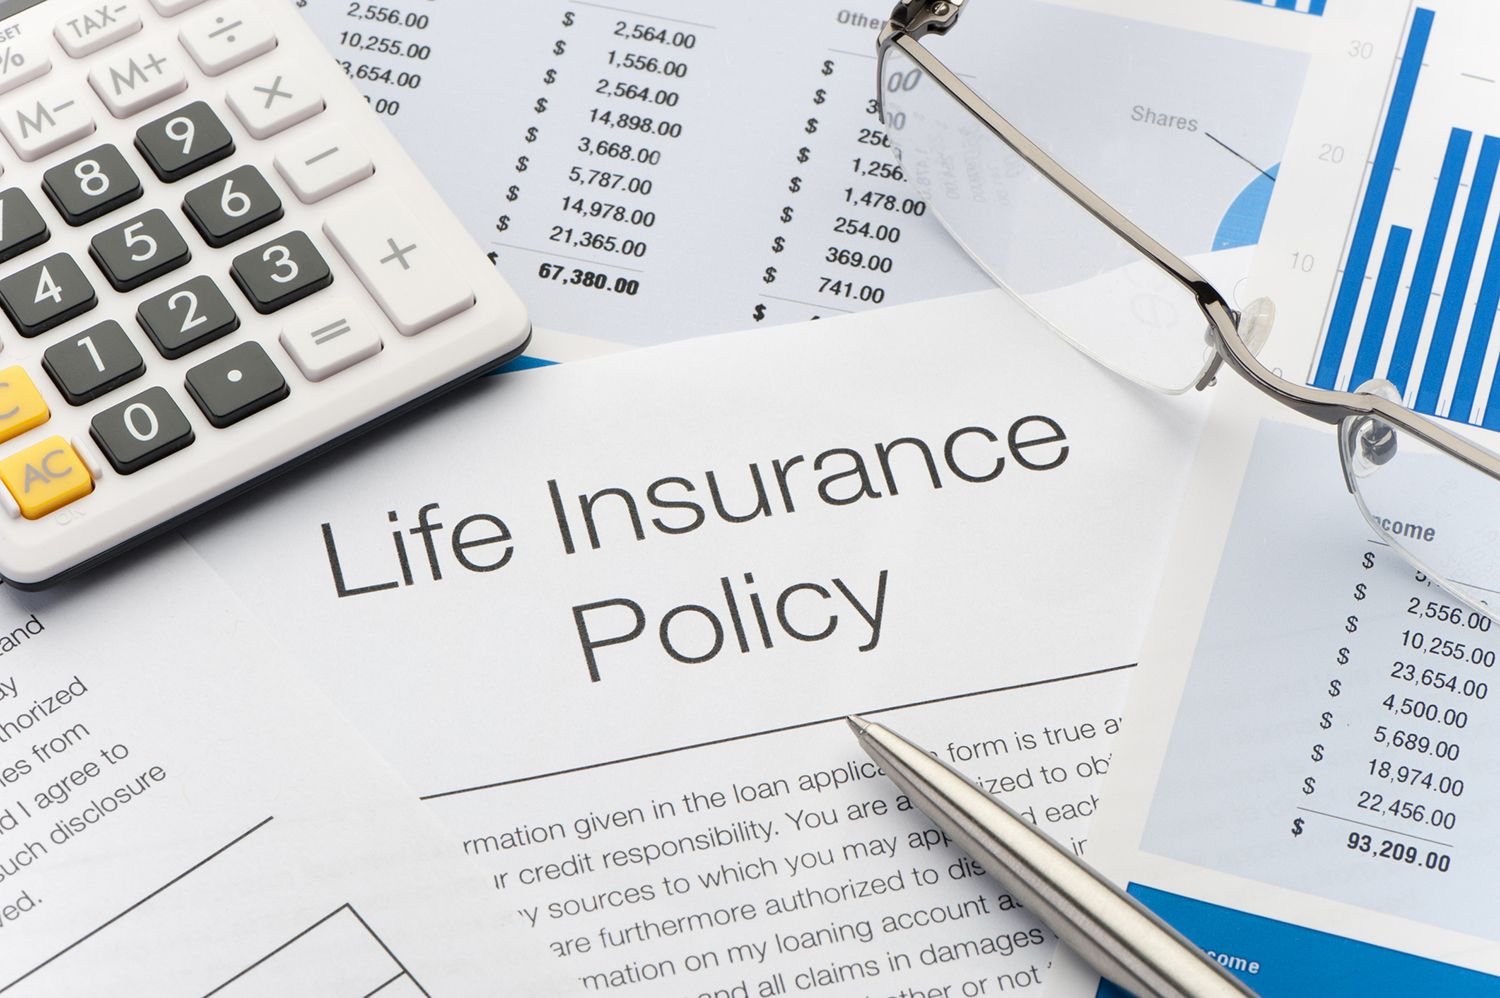 There is a Grace Amount for Termination Insurance